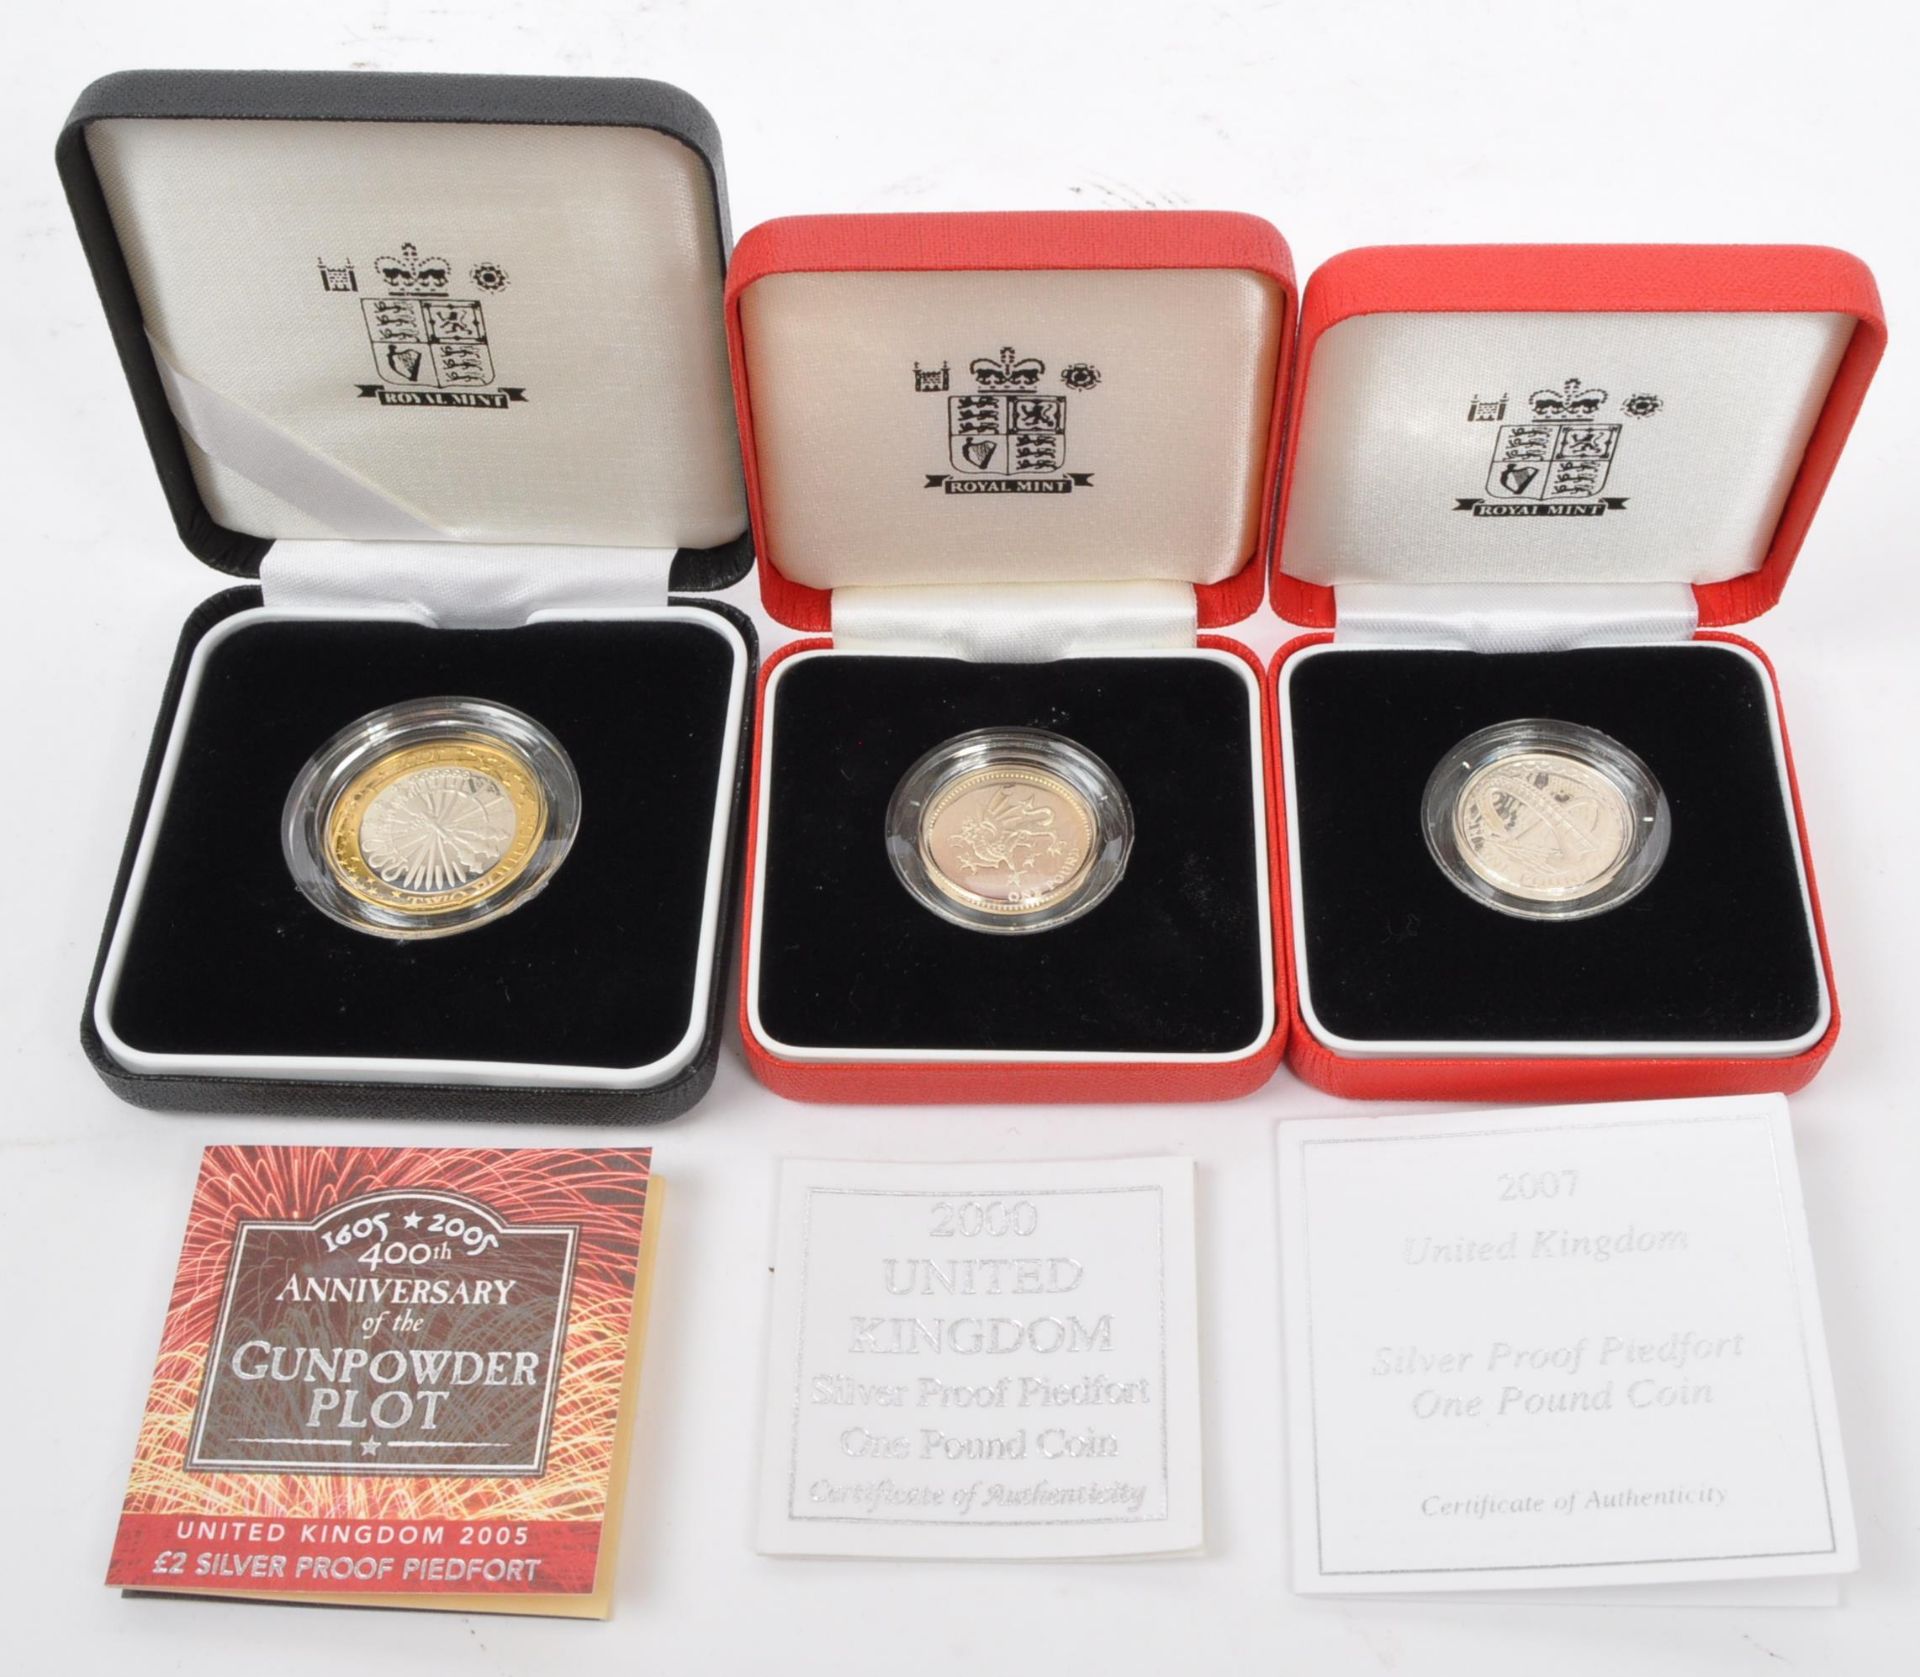 THREE PROOF SILVER COINS - TWO PIEDFORD COINS & TWO POUND COIN